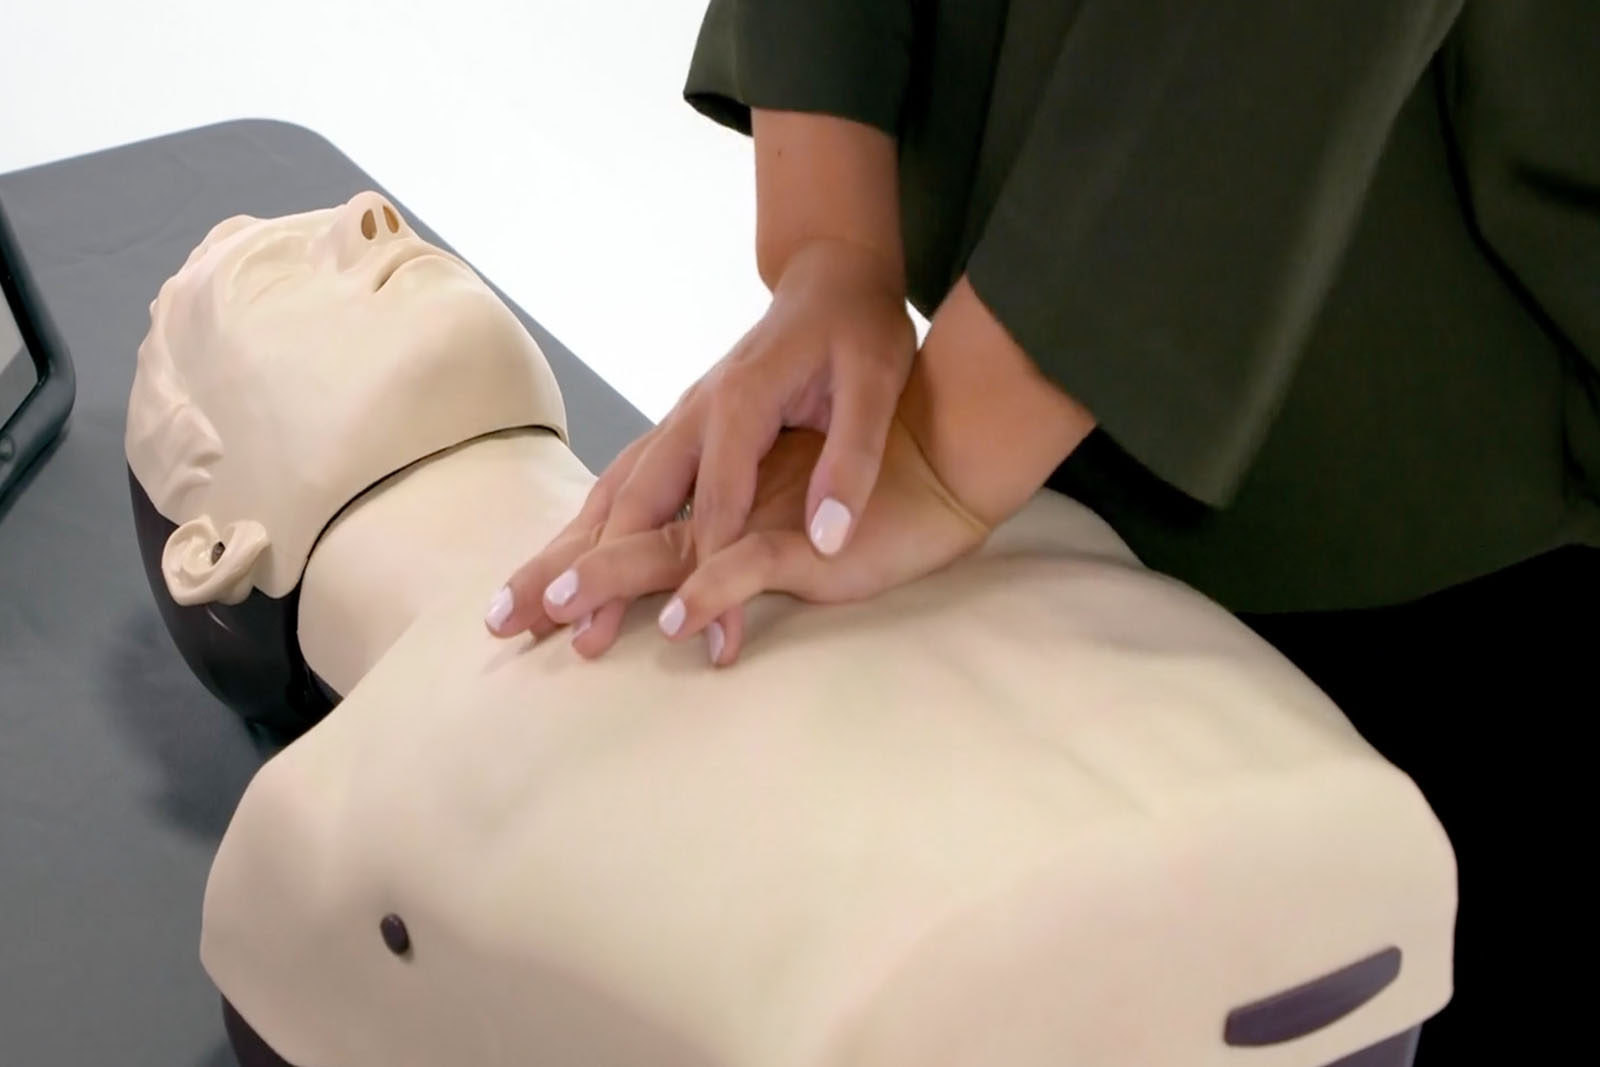 Person practicing resuscitation using a mankikin.